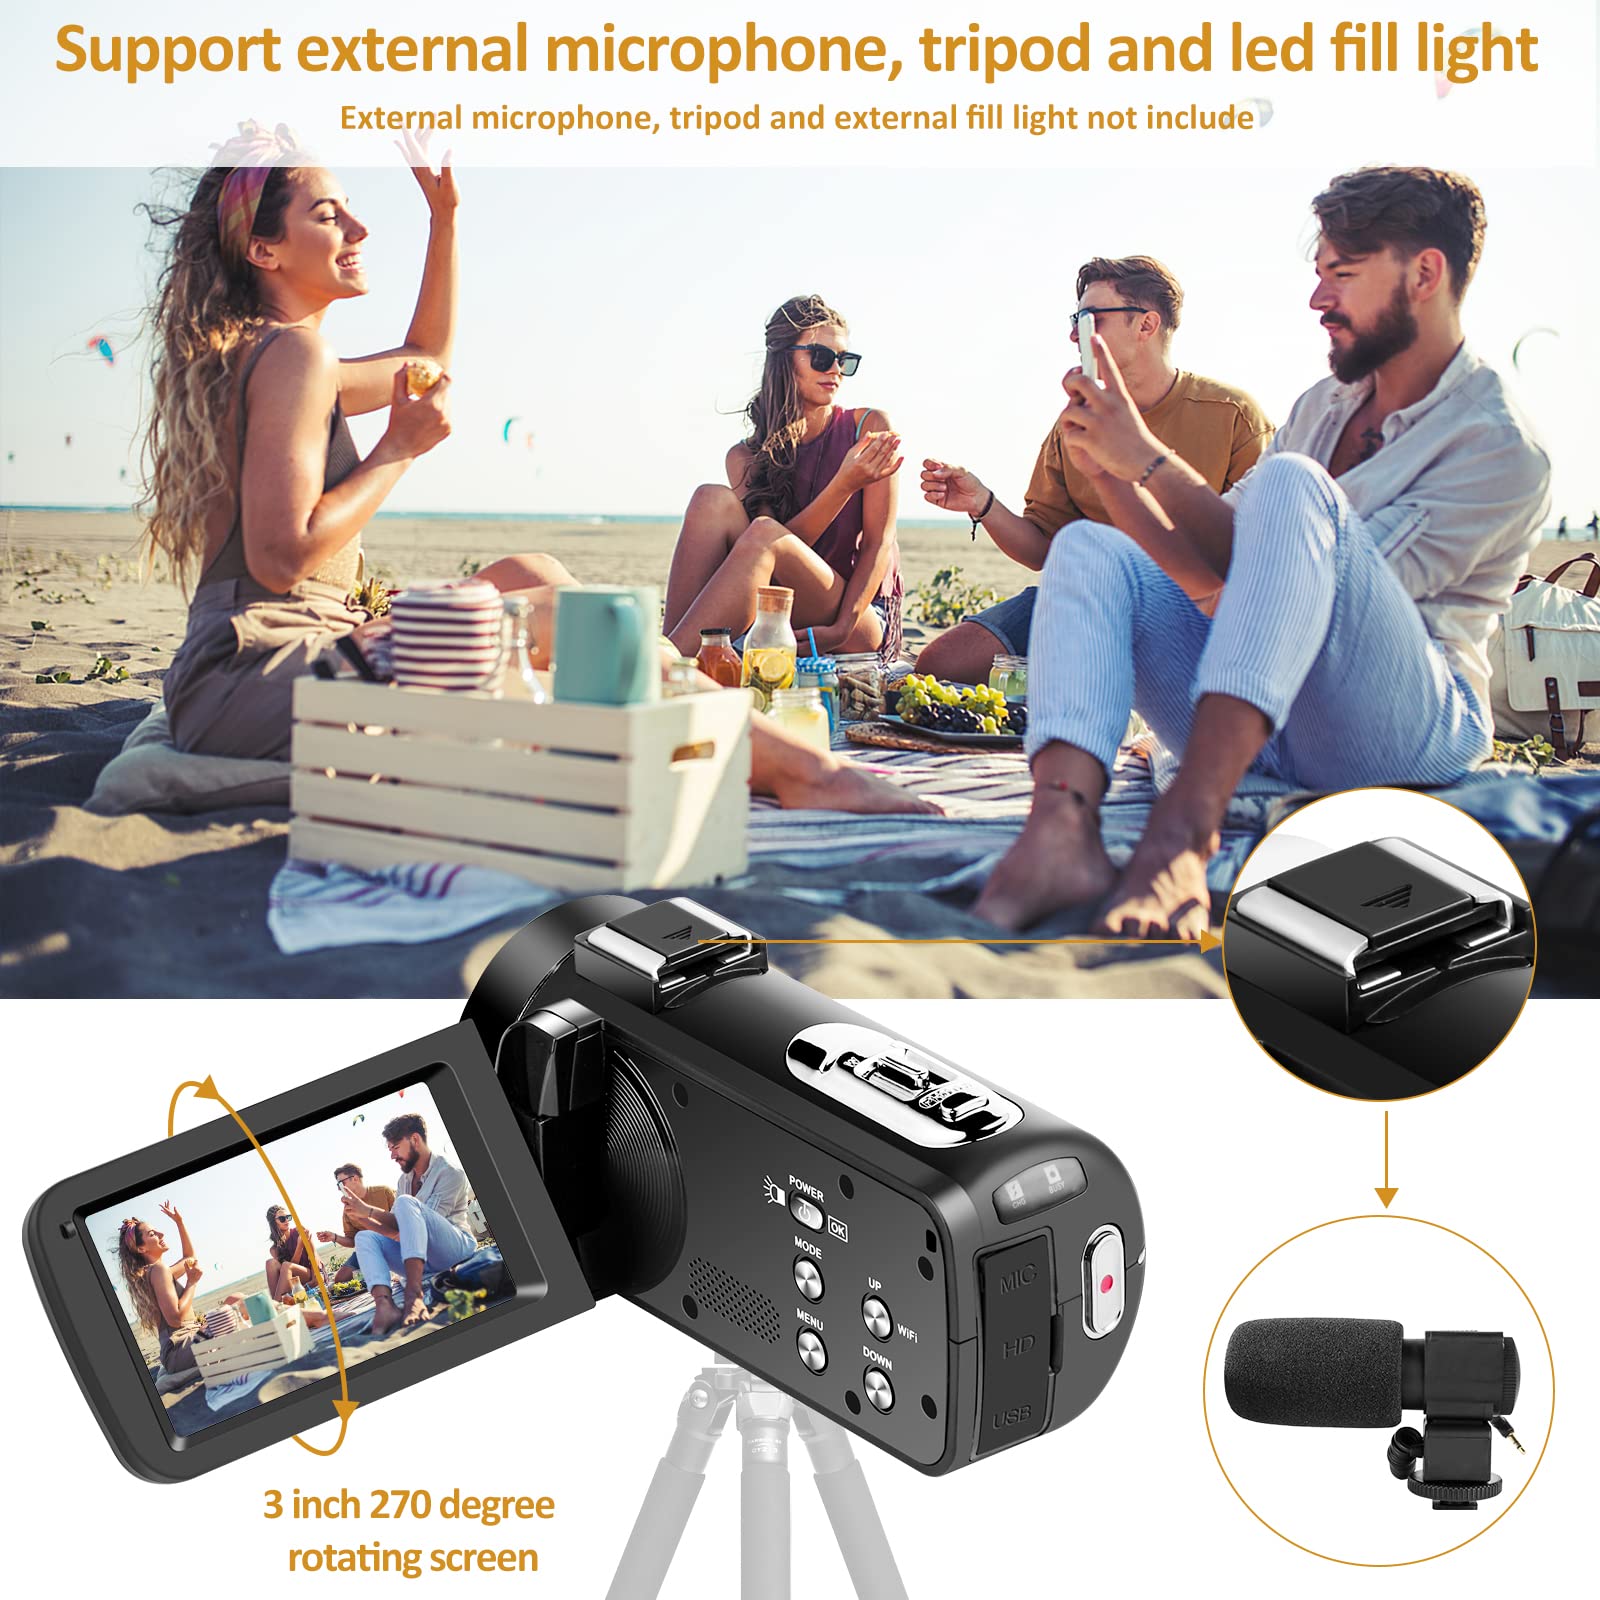 2.7K 30 FPS Video Camera 42MP 18X Digital Camera Video Camera for YouTube 3.0inch Flip Screen Camcorder Vlogging Camera with Remote Control and Two Batteries